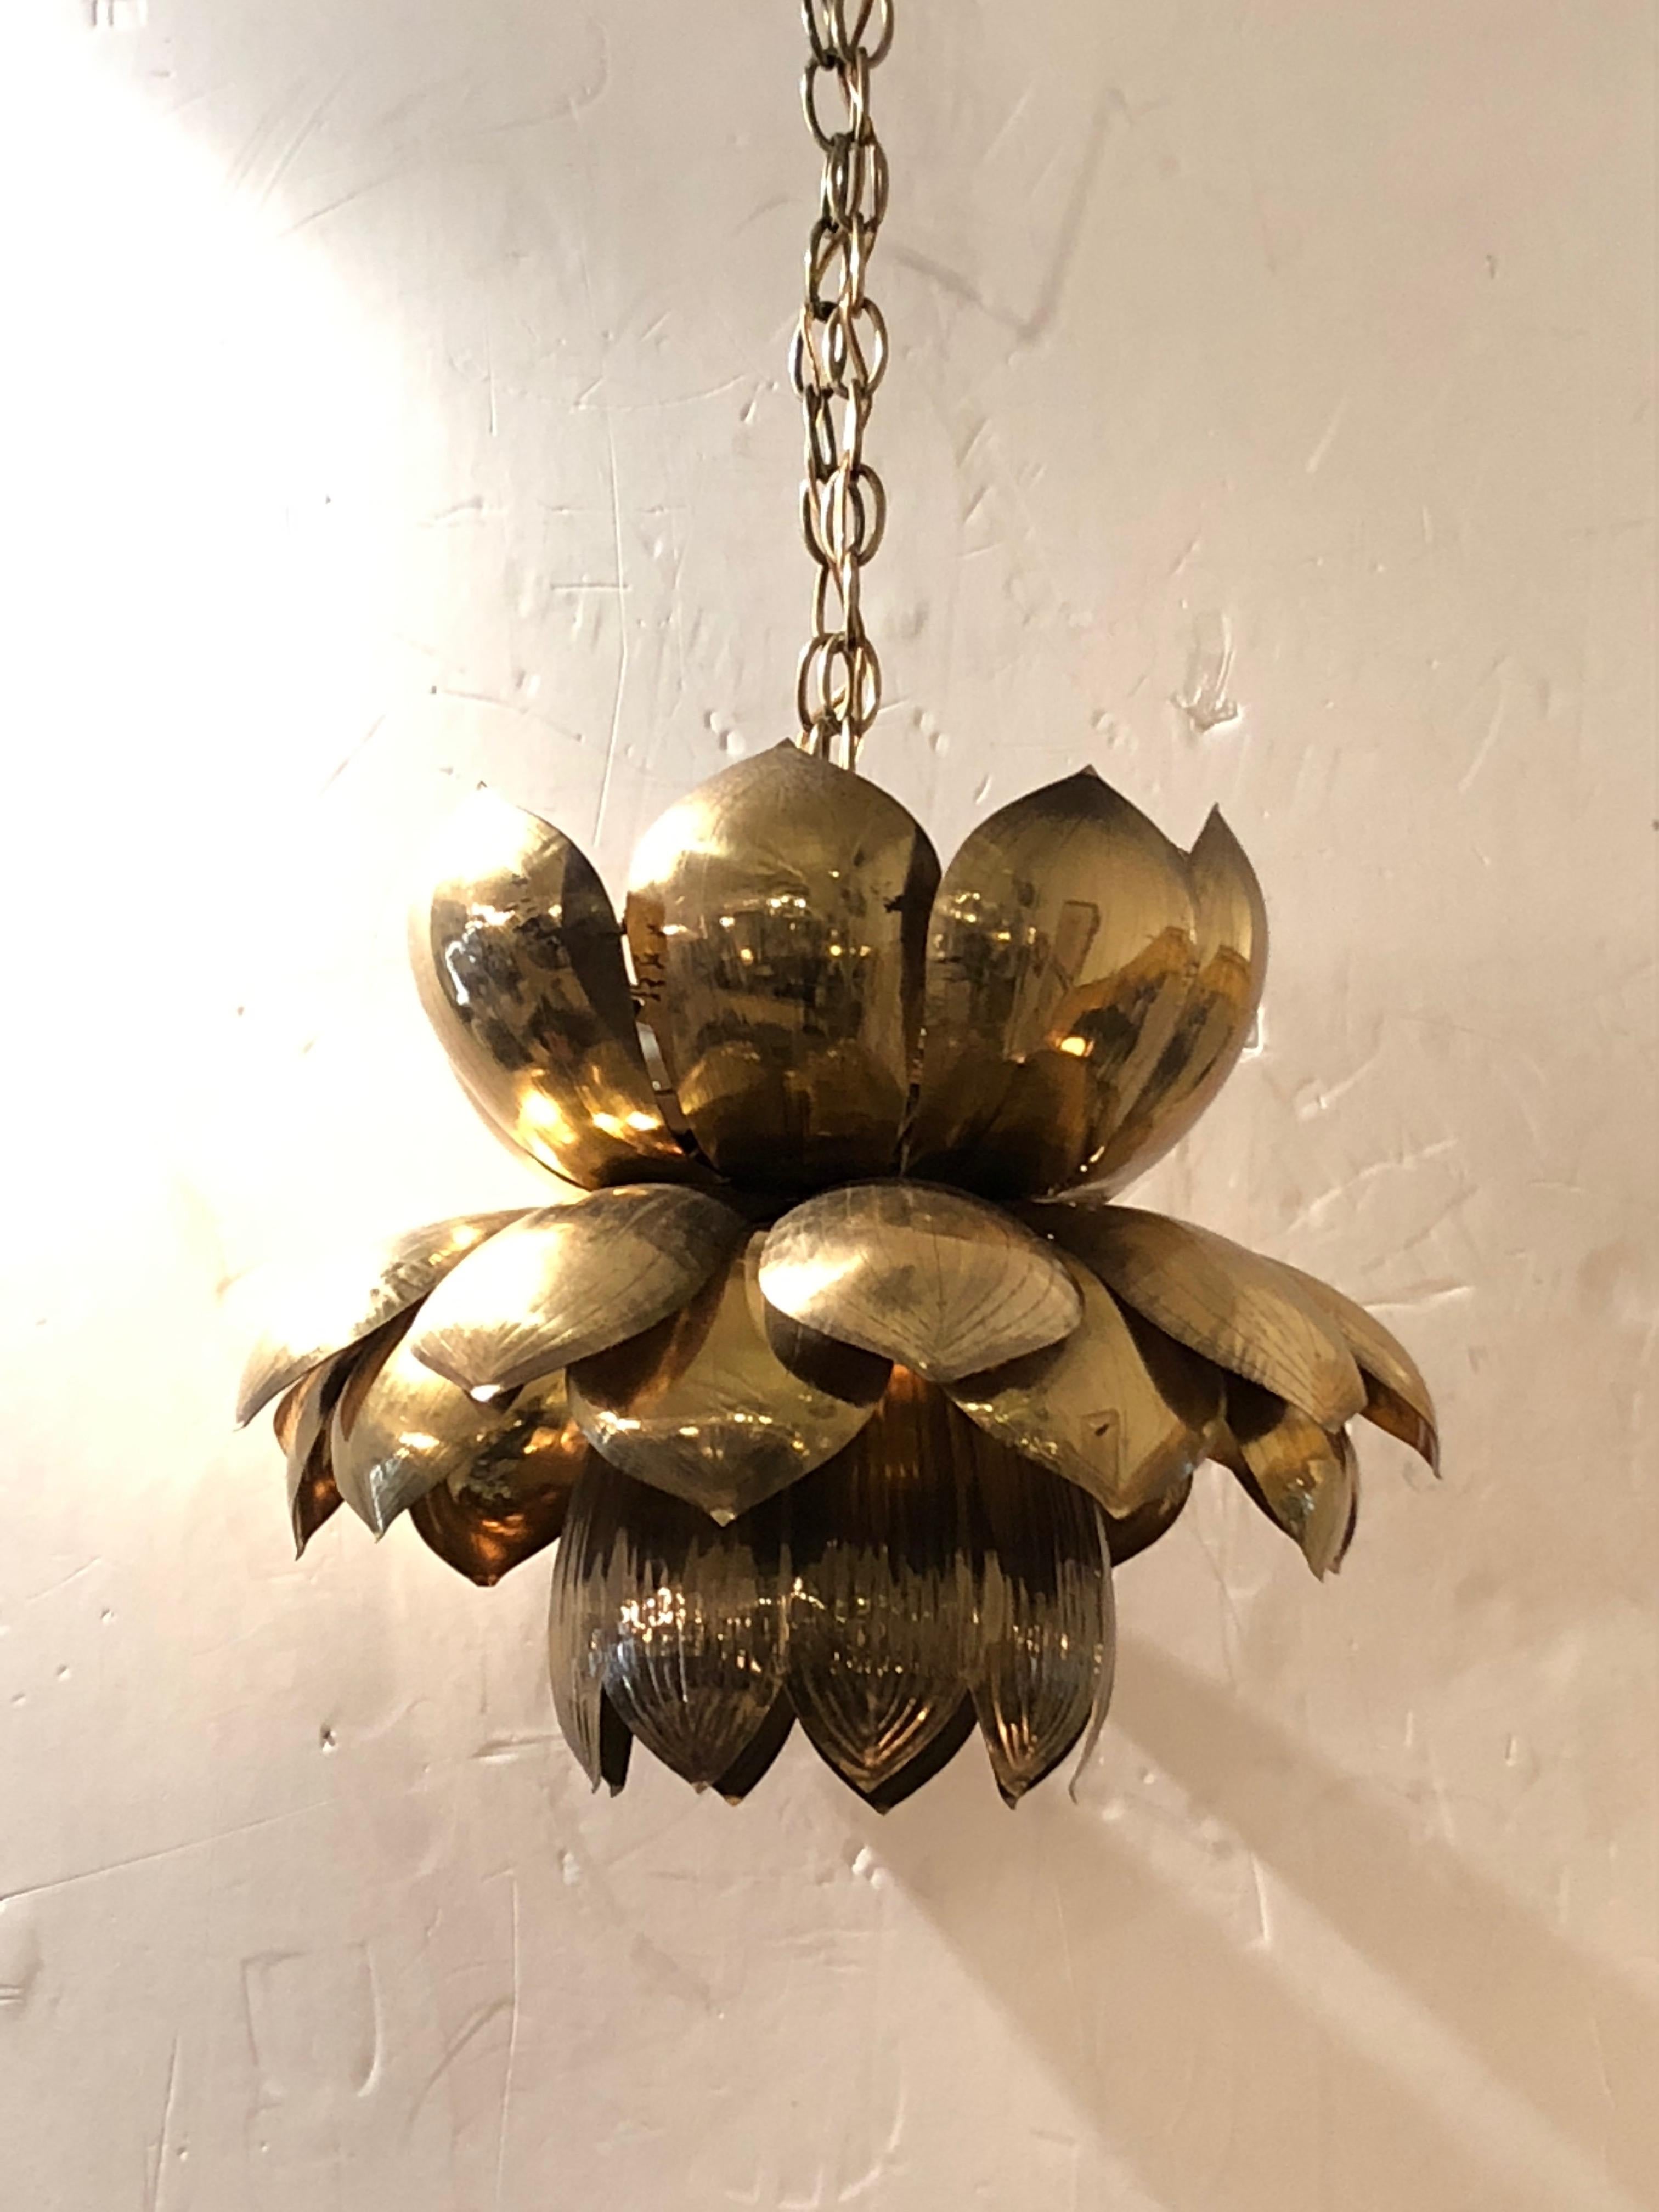 Parzinger style lotus shaped brass pendant chandelier made by Feldman Lighting, an iconic Mid-Century Modern shape having original wiring, 3 bulbs in the top and 1 bulb in the bottom. 3 ft. of ample chain included.